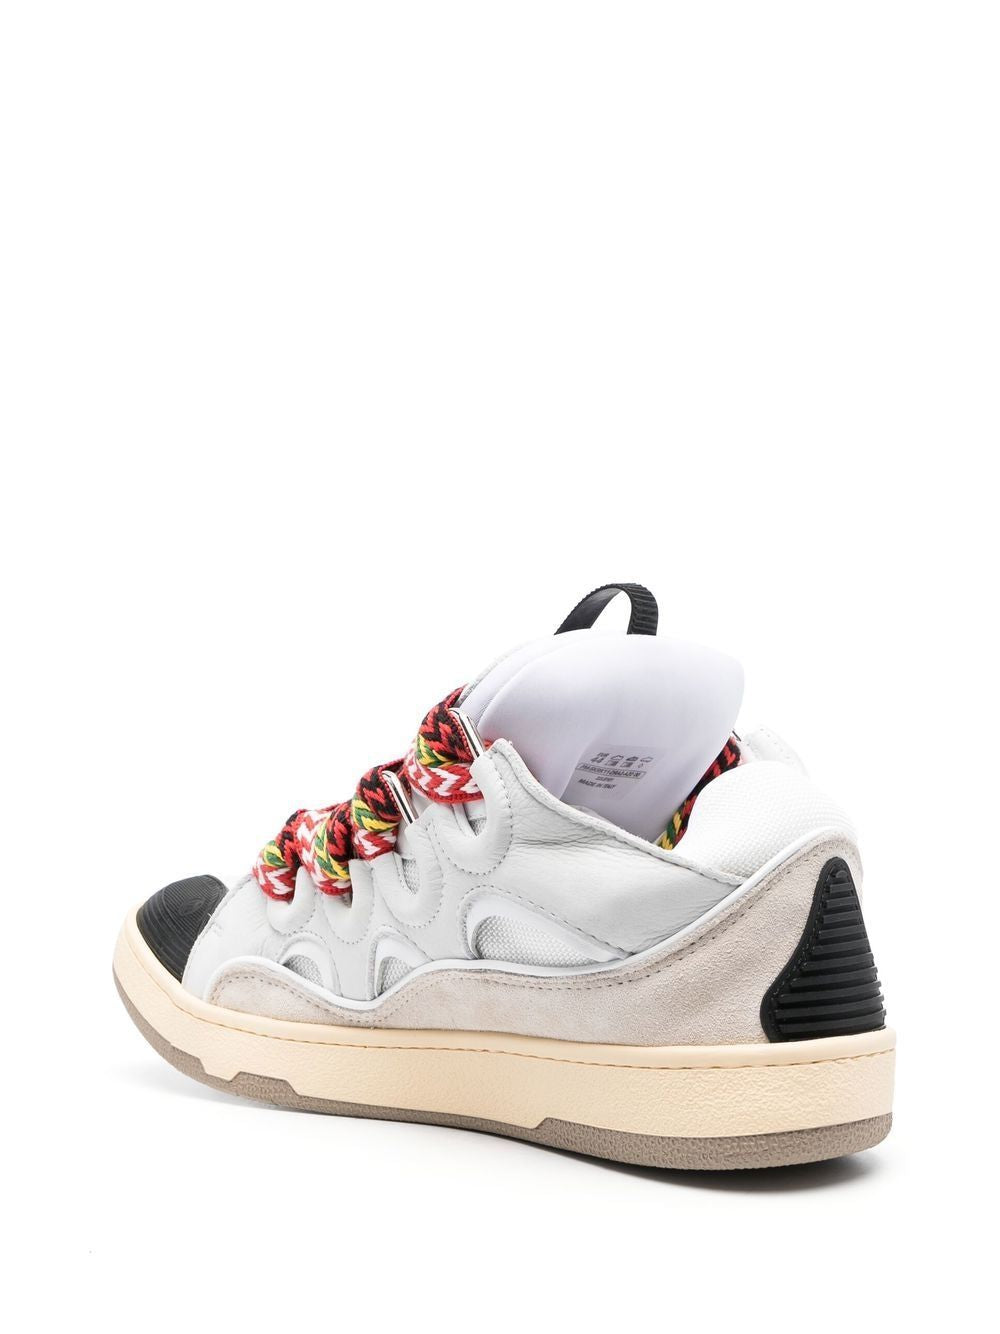 White Lanvin Curb Sneakers - Side Back